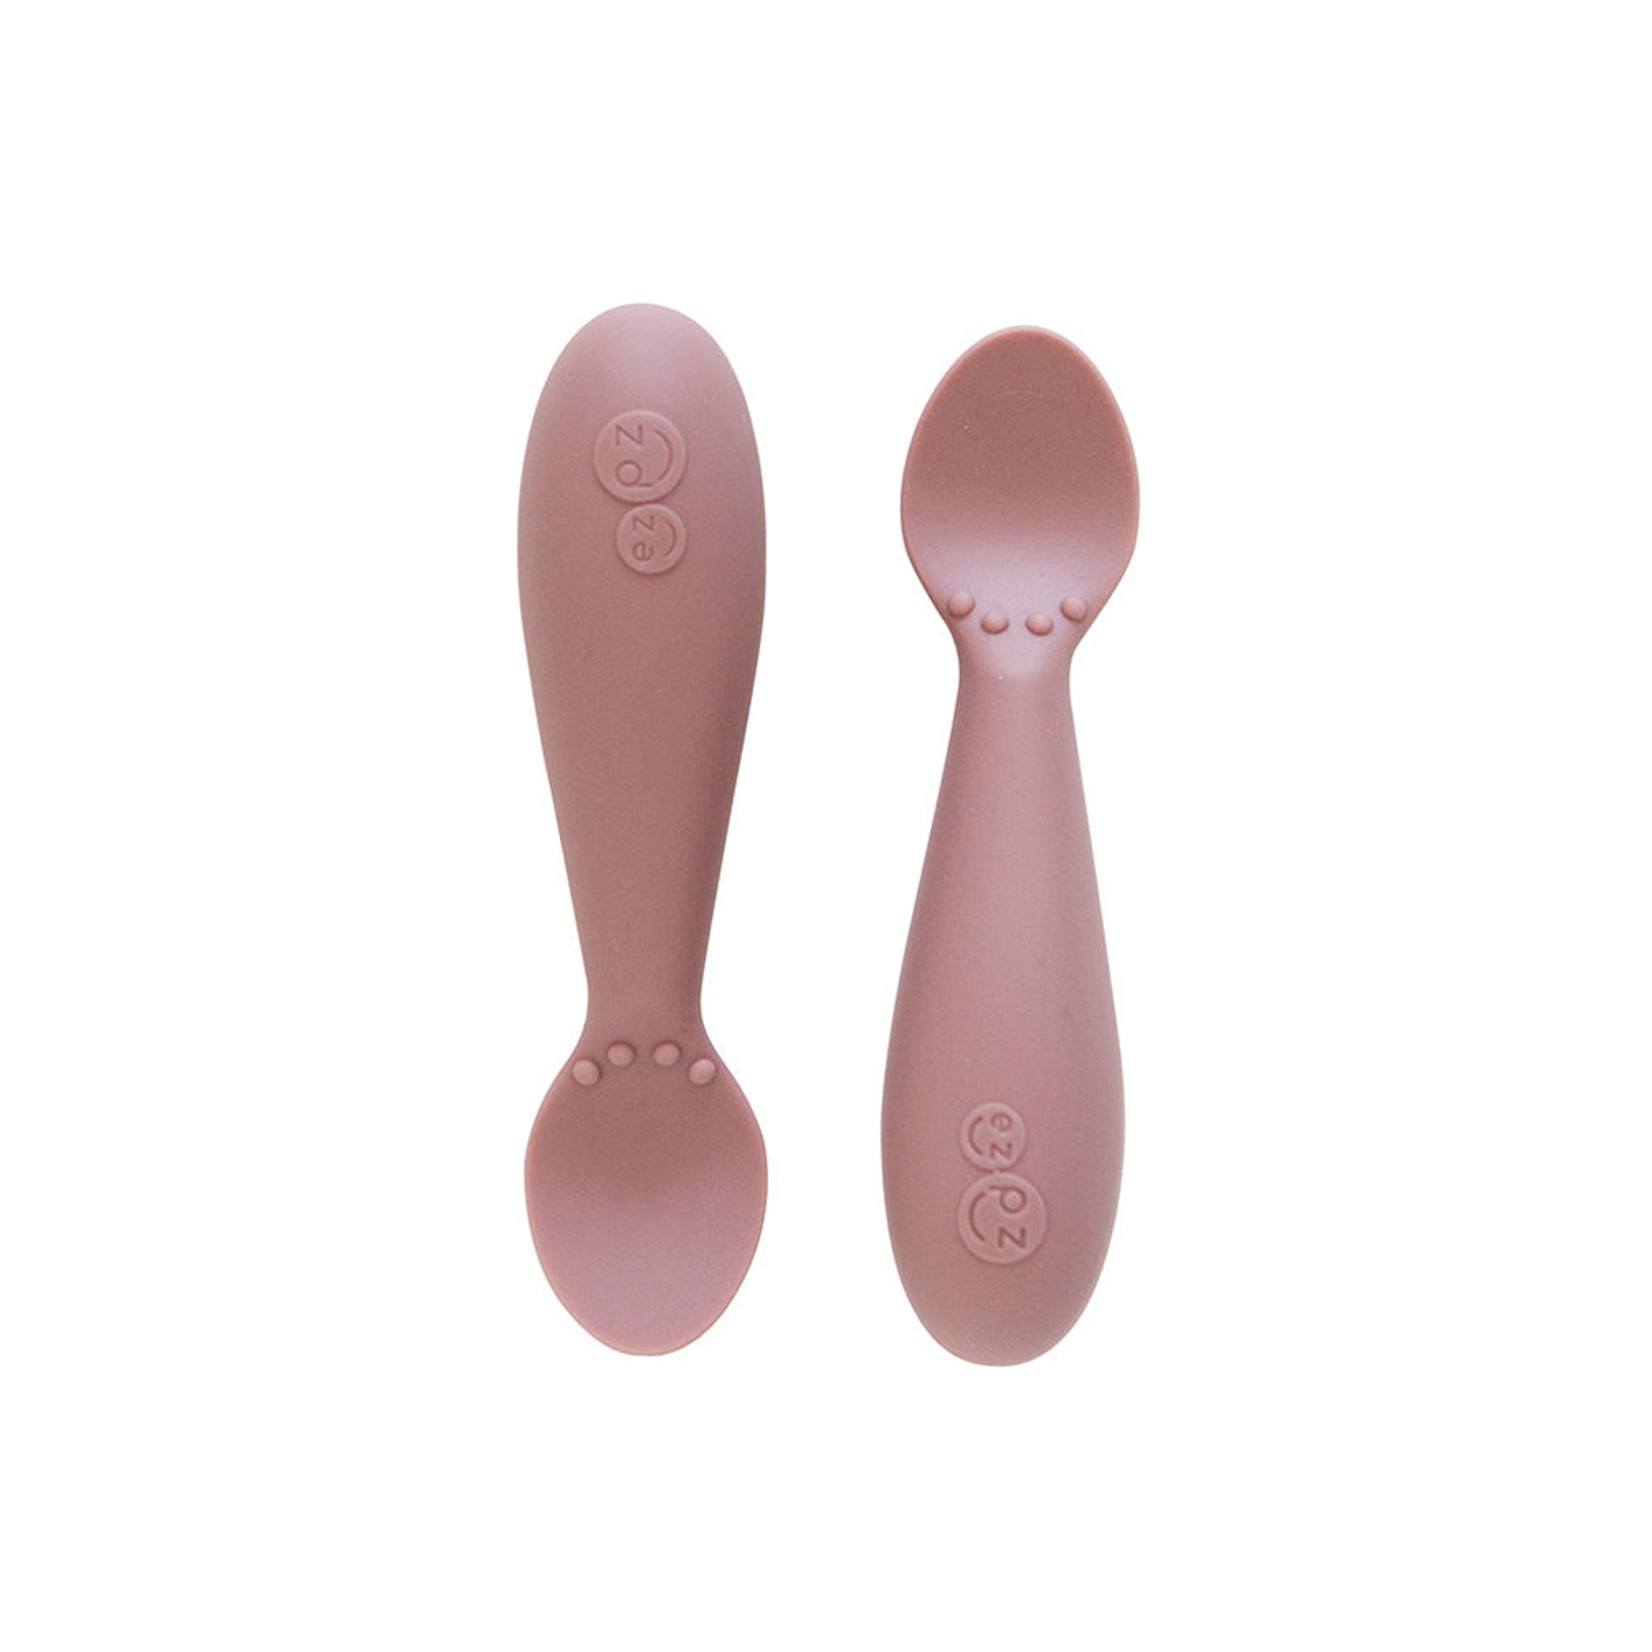 Ezpz - Tiny Spoon Pack of 2 - Pewter